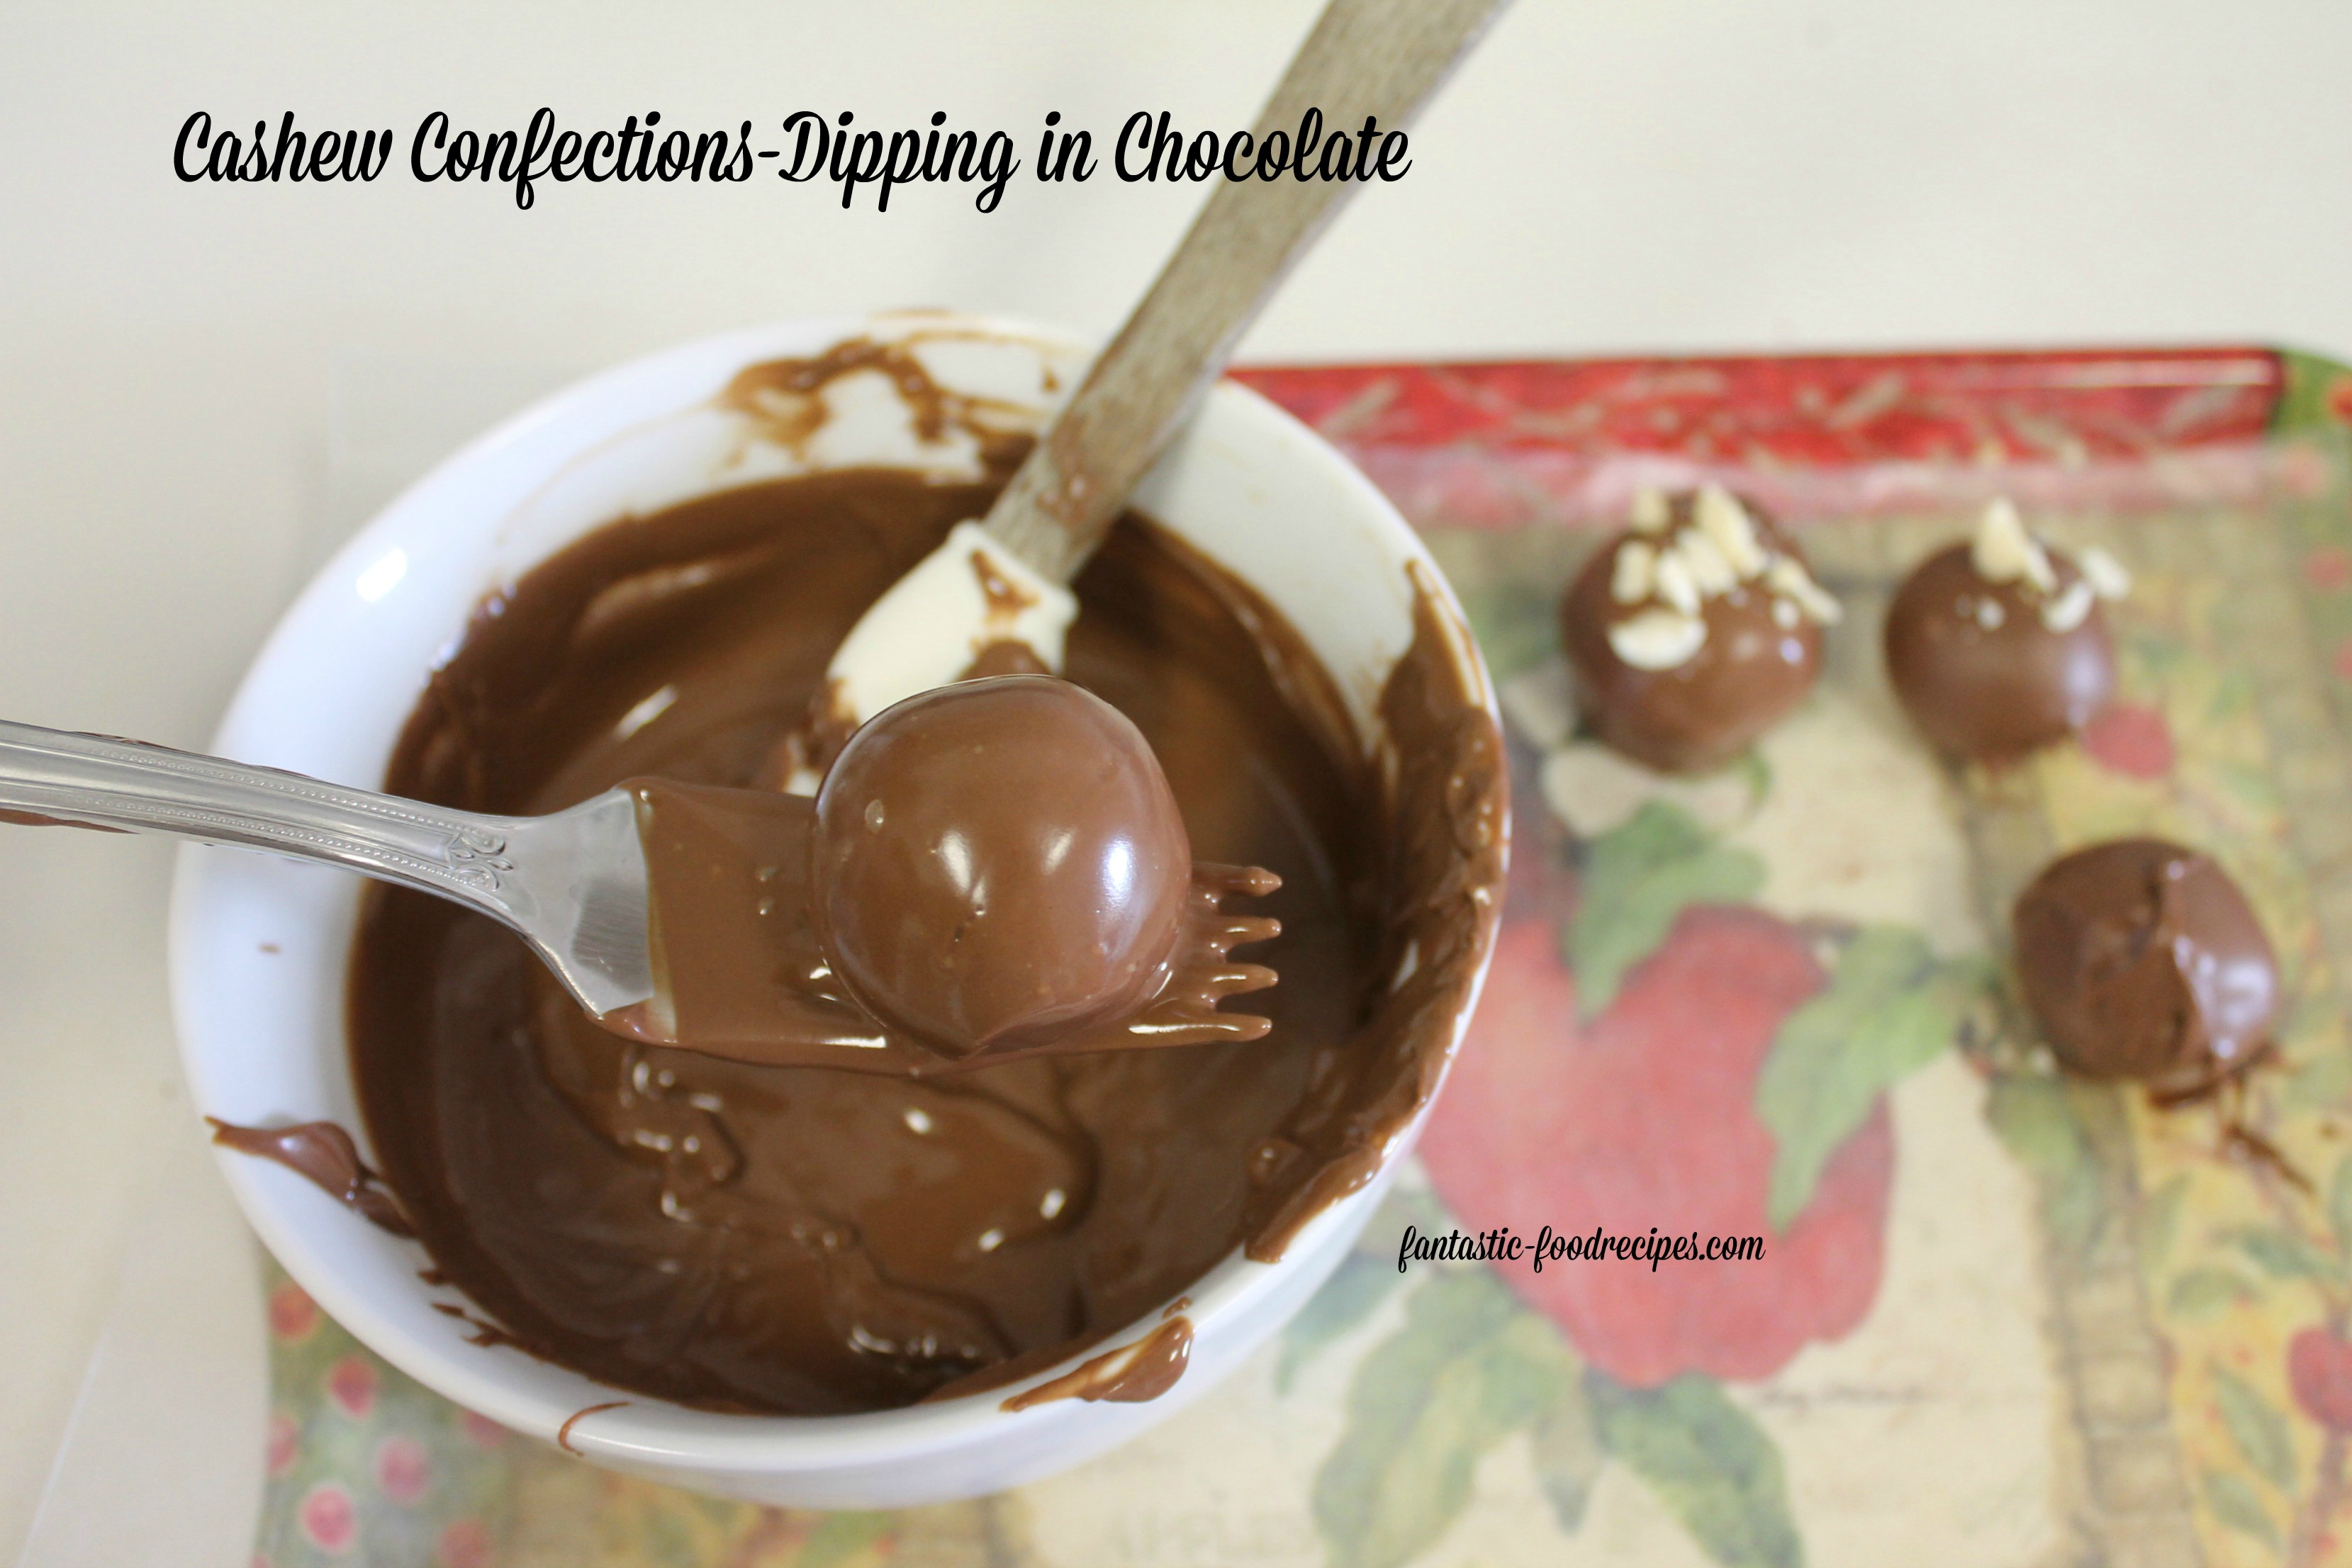 Cashew confections dip in chocolate using fork